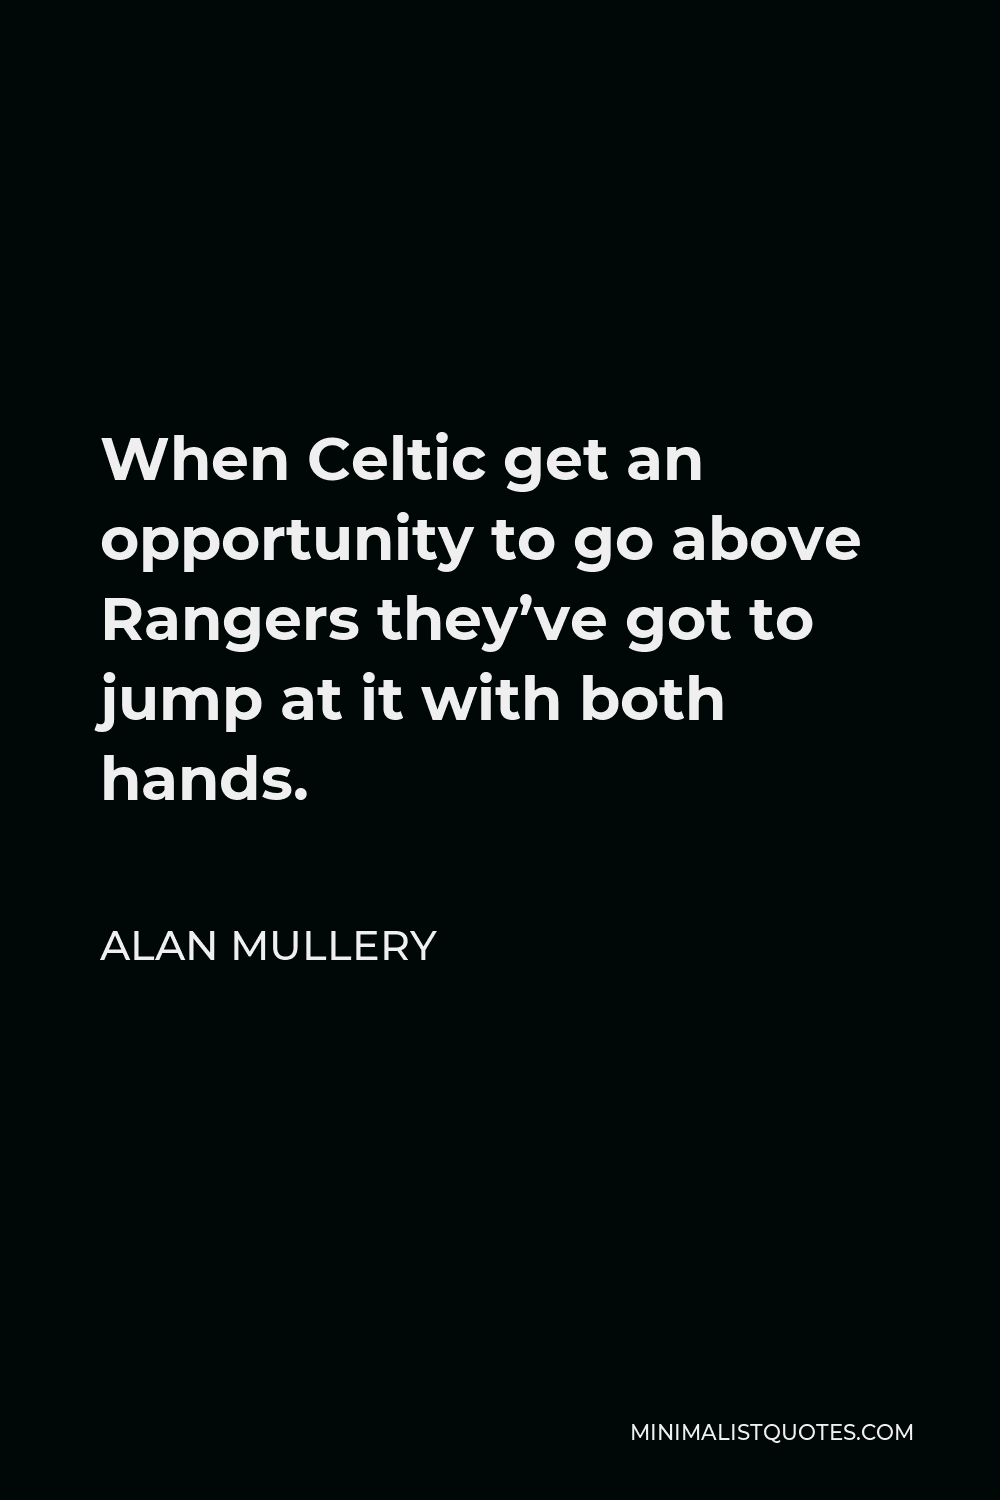 Alan Mullery Quote - When Celtic get an opportunity to go above Rangers they’ve got to jump at it with both hands.